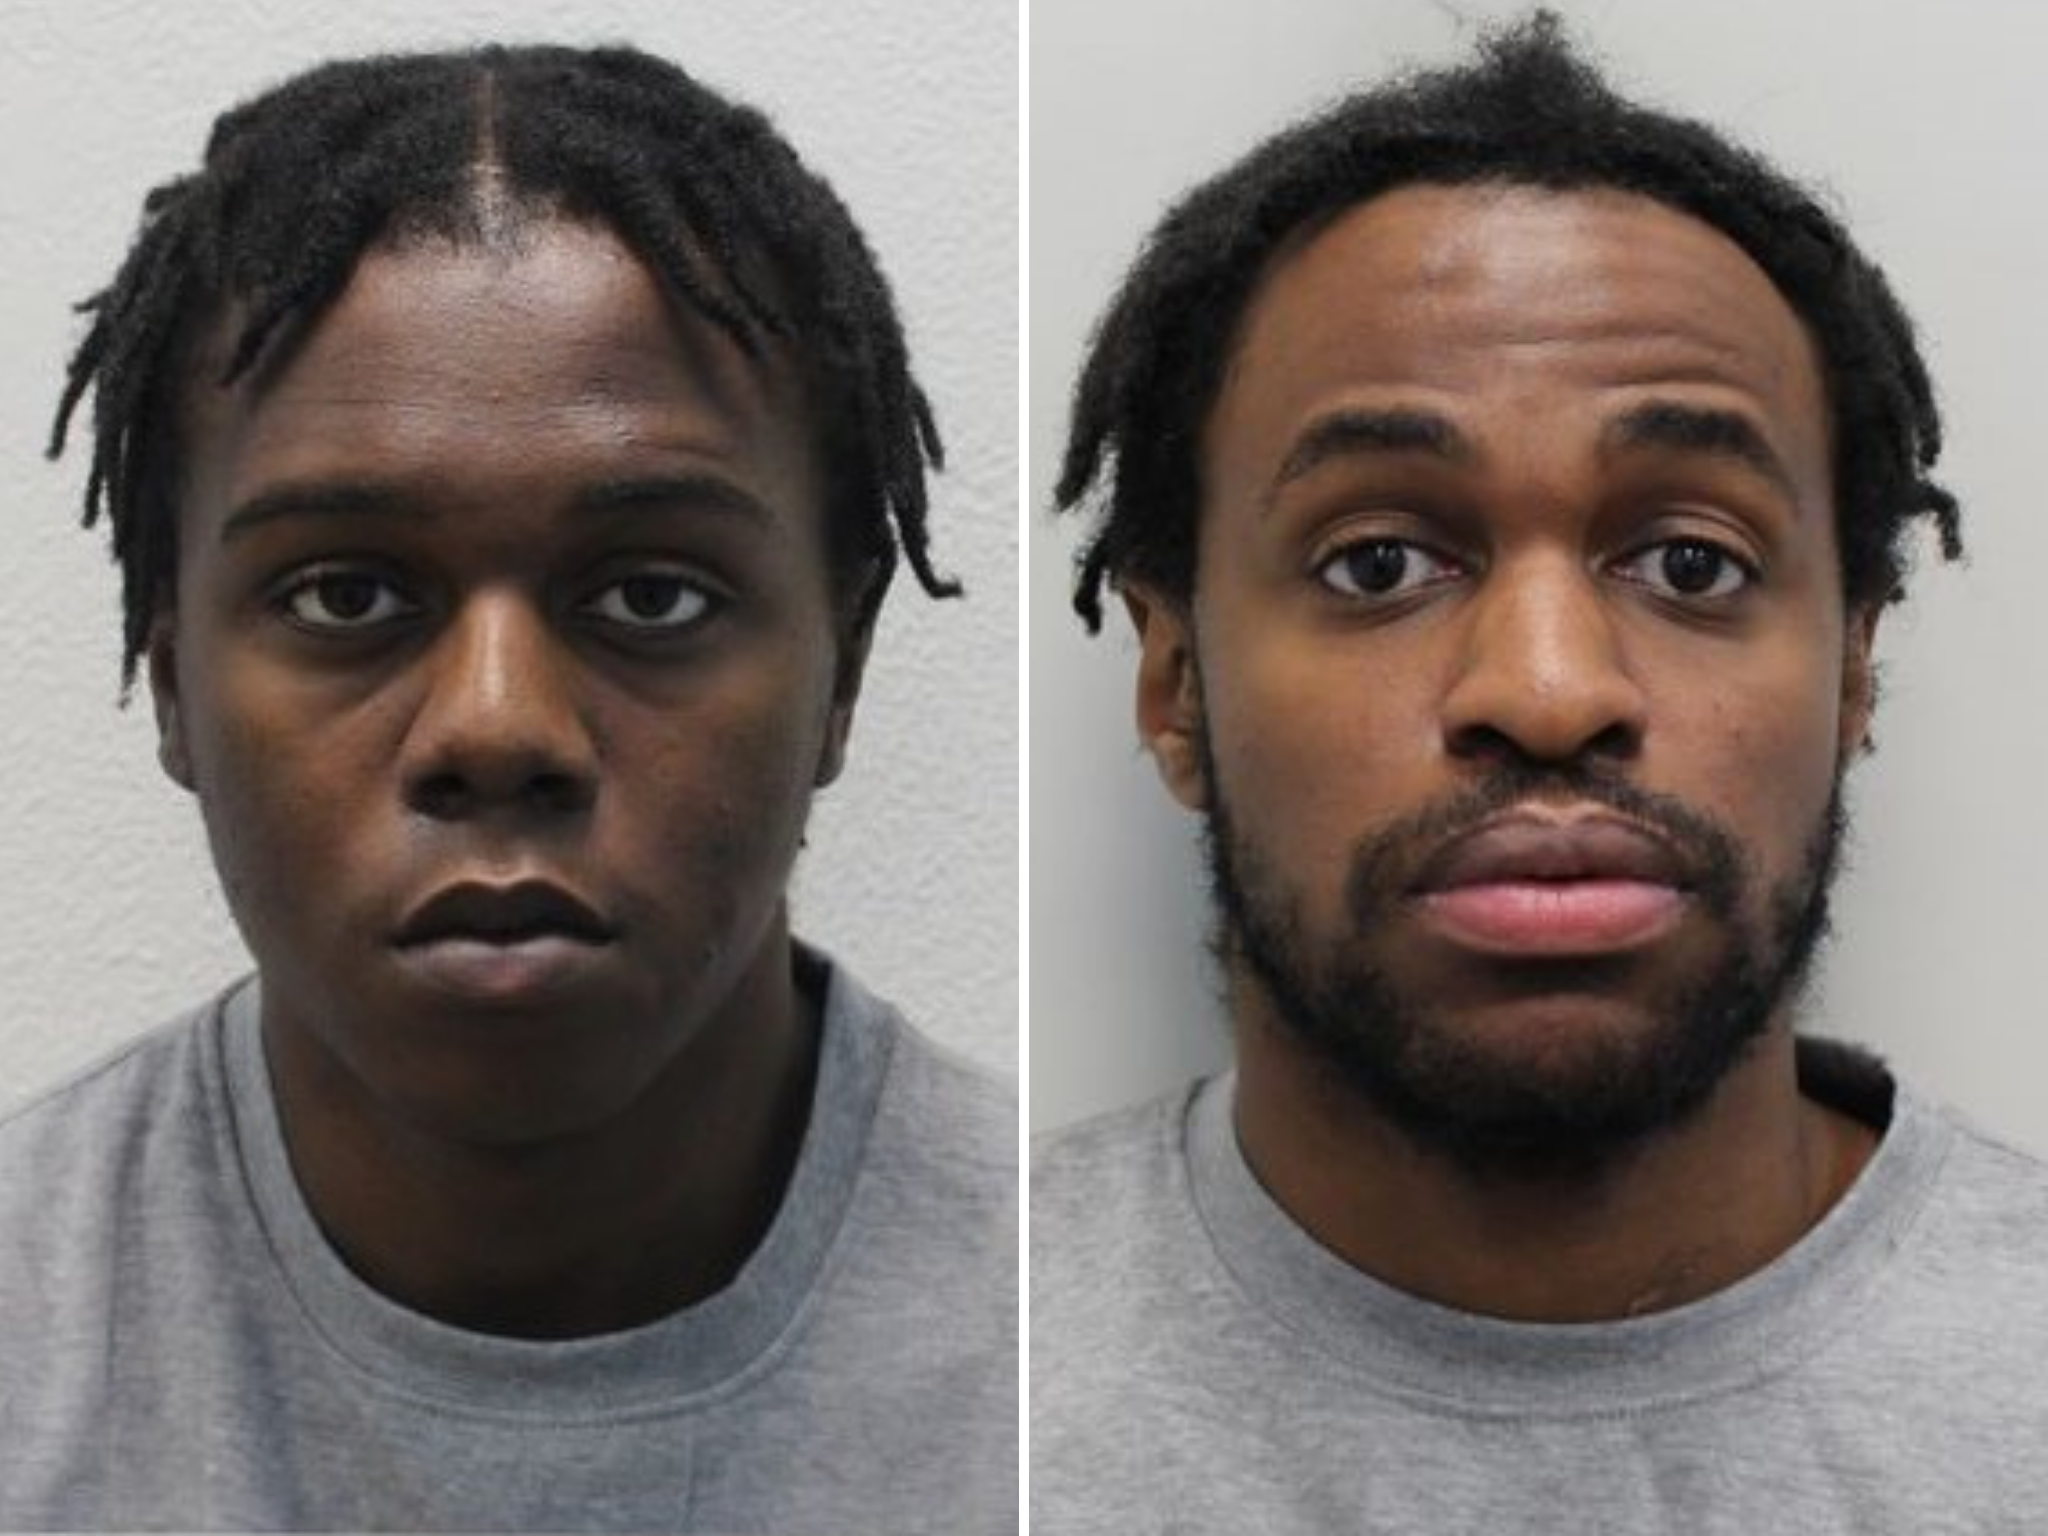 Two friends who kidnapped a teenage girl, beat her with nunchucks and repeatedly raped her have been convicted